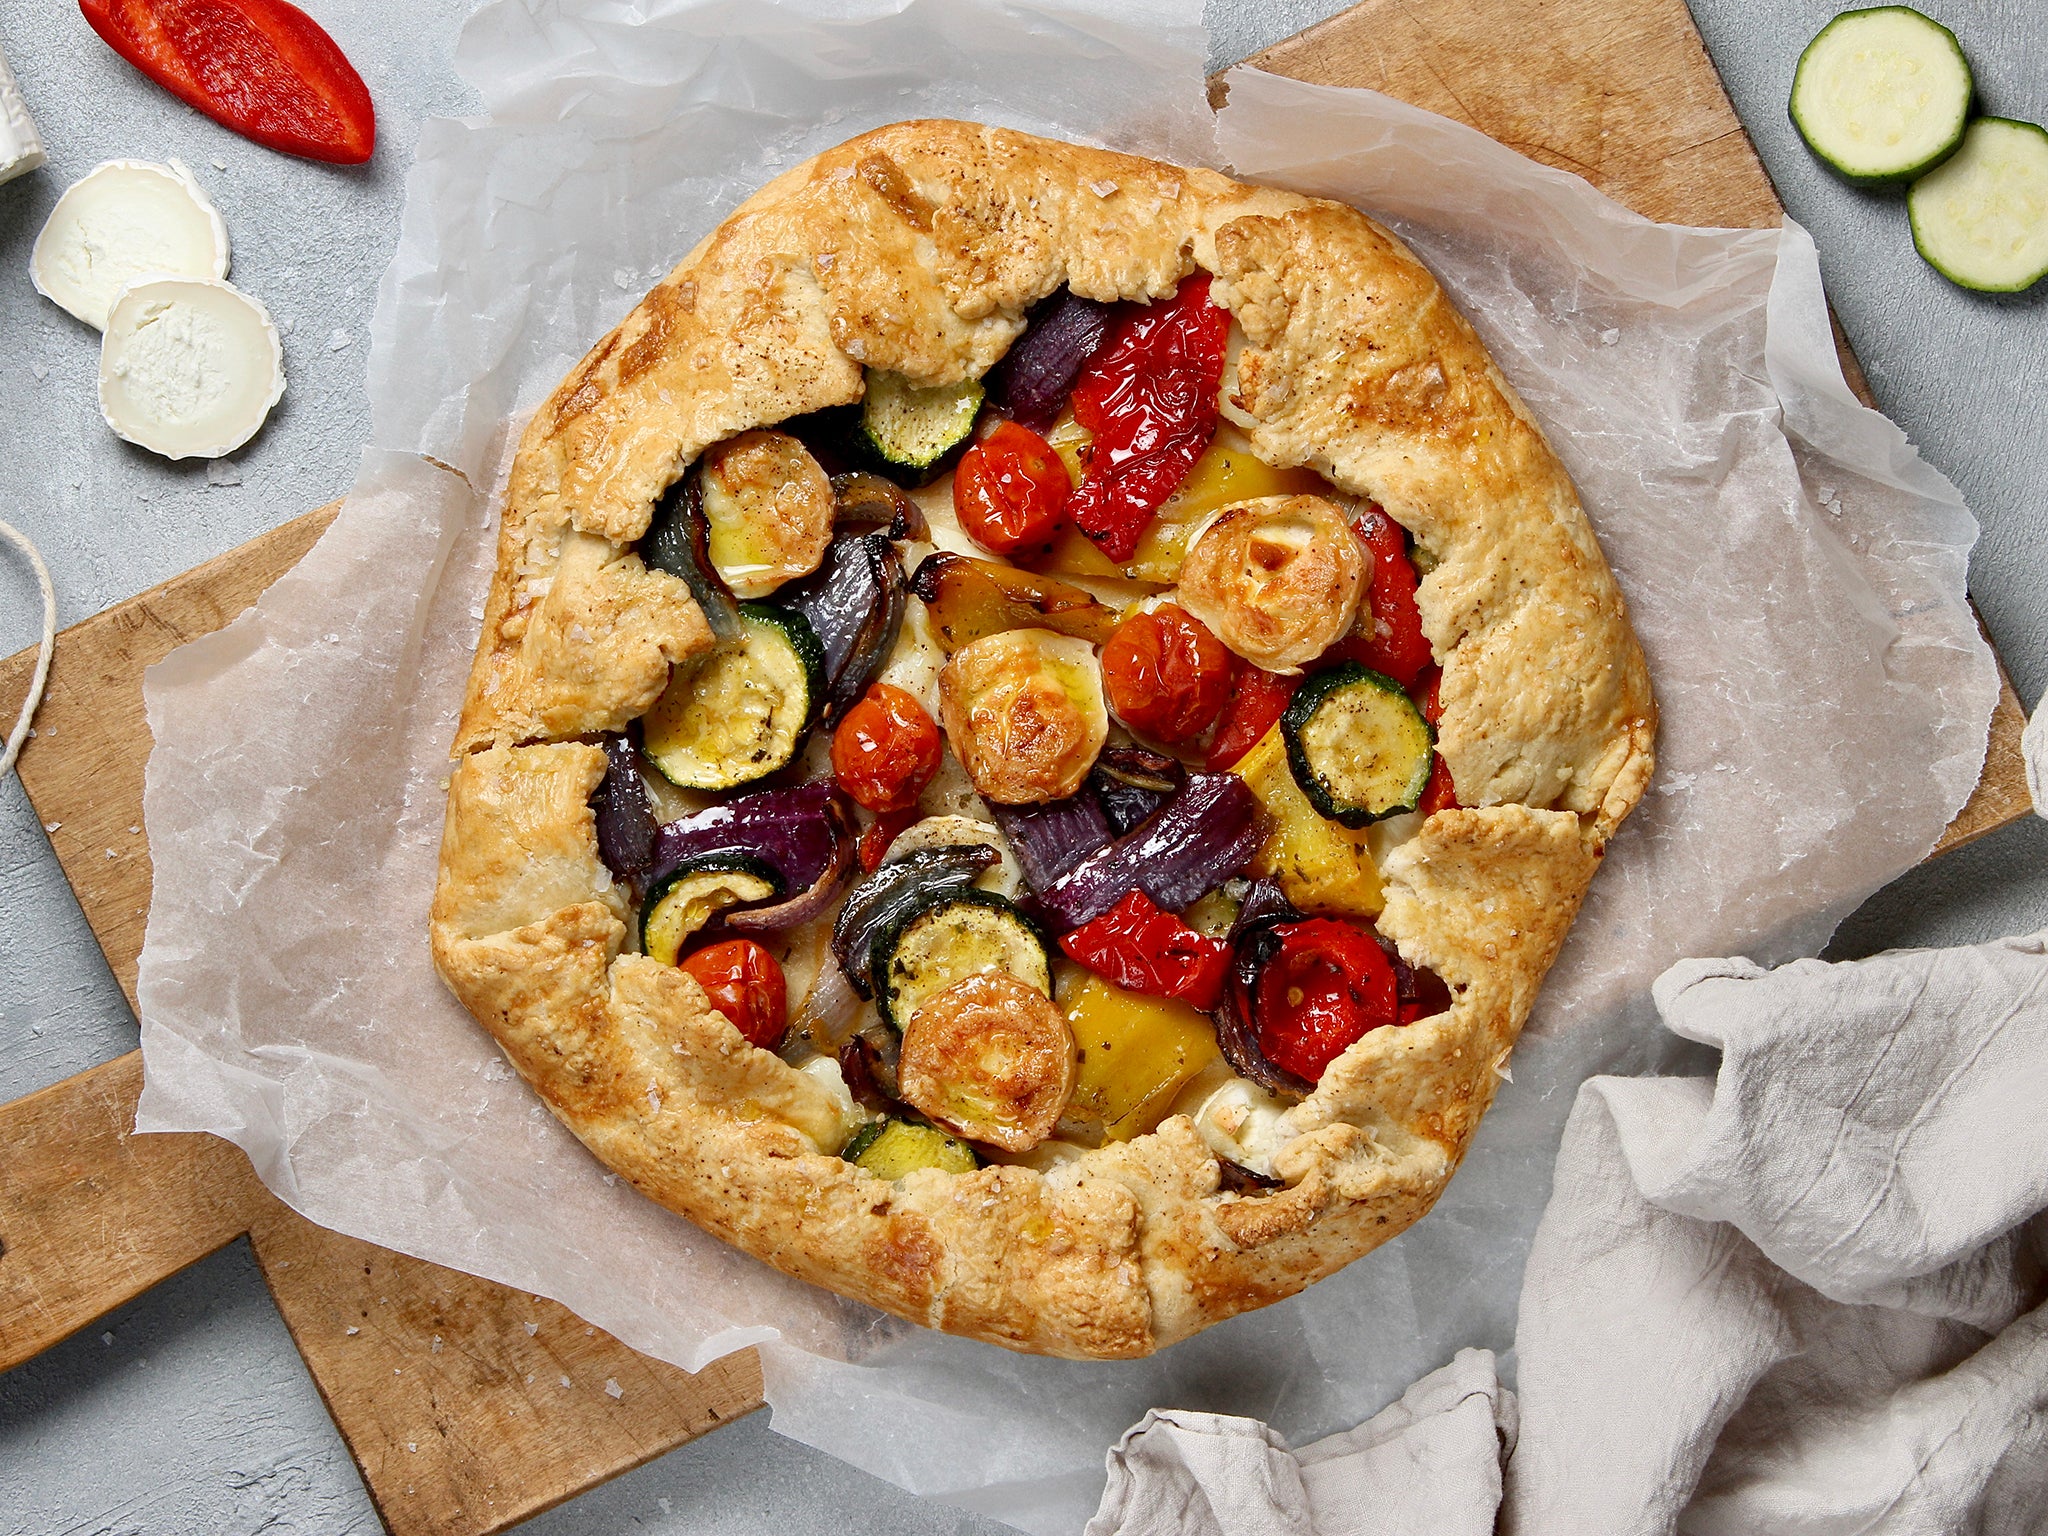 Think of this as the easiest pie you’ve ever made. Then make it and you can thank us later